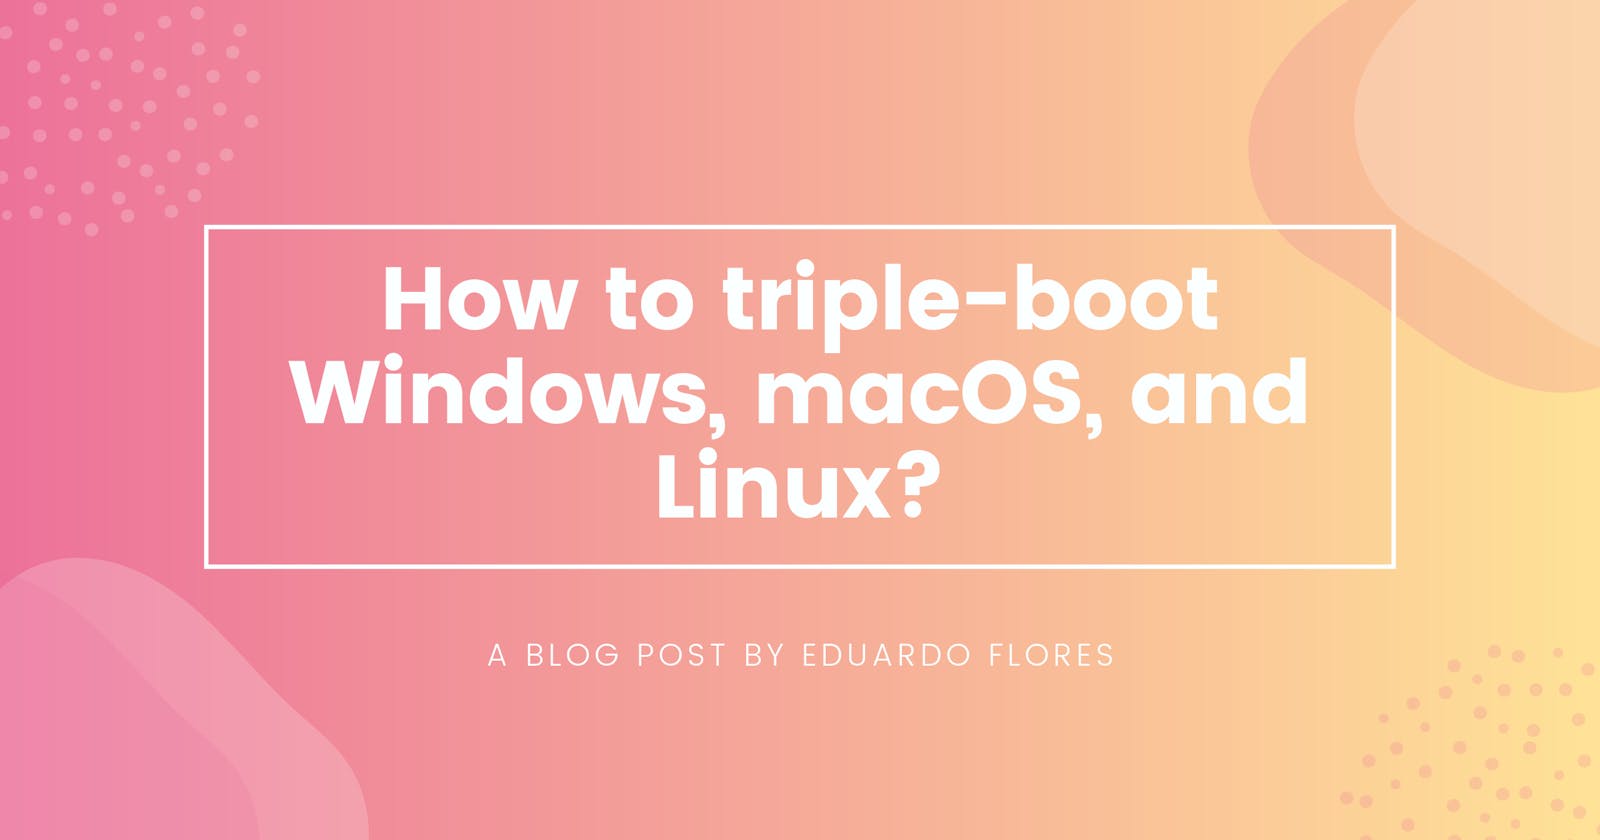 How to triple-boot Windows, macOS and Linux?